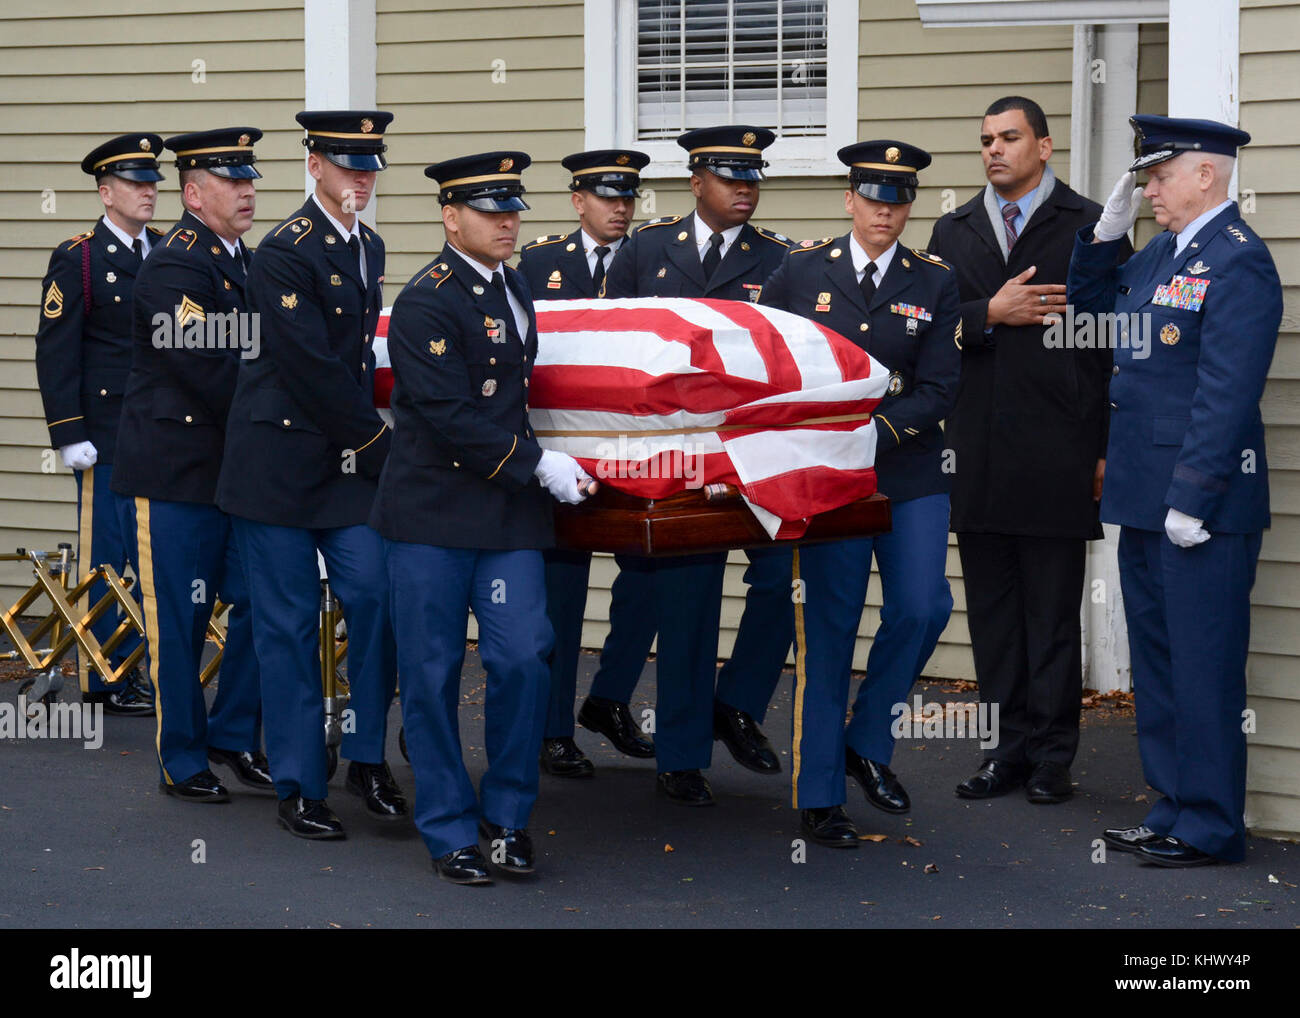 CONCORD, Mass. (Nov. 15, 2017) The Military Funeral Honors Team of the Massachusetts Army National Guard carries the casket of Medal of Honor recipient Capt. Thomas J. Hudner, Jr., during a funeral procession in Capt. Hudner’s honor. Capt. Hudner, a naval aviator, received the Medal of Honor for his actions during the Battle of the Chosin Reservoir during the Korean War. Stock Photo